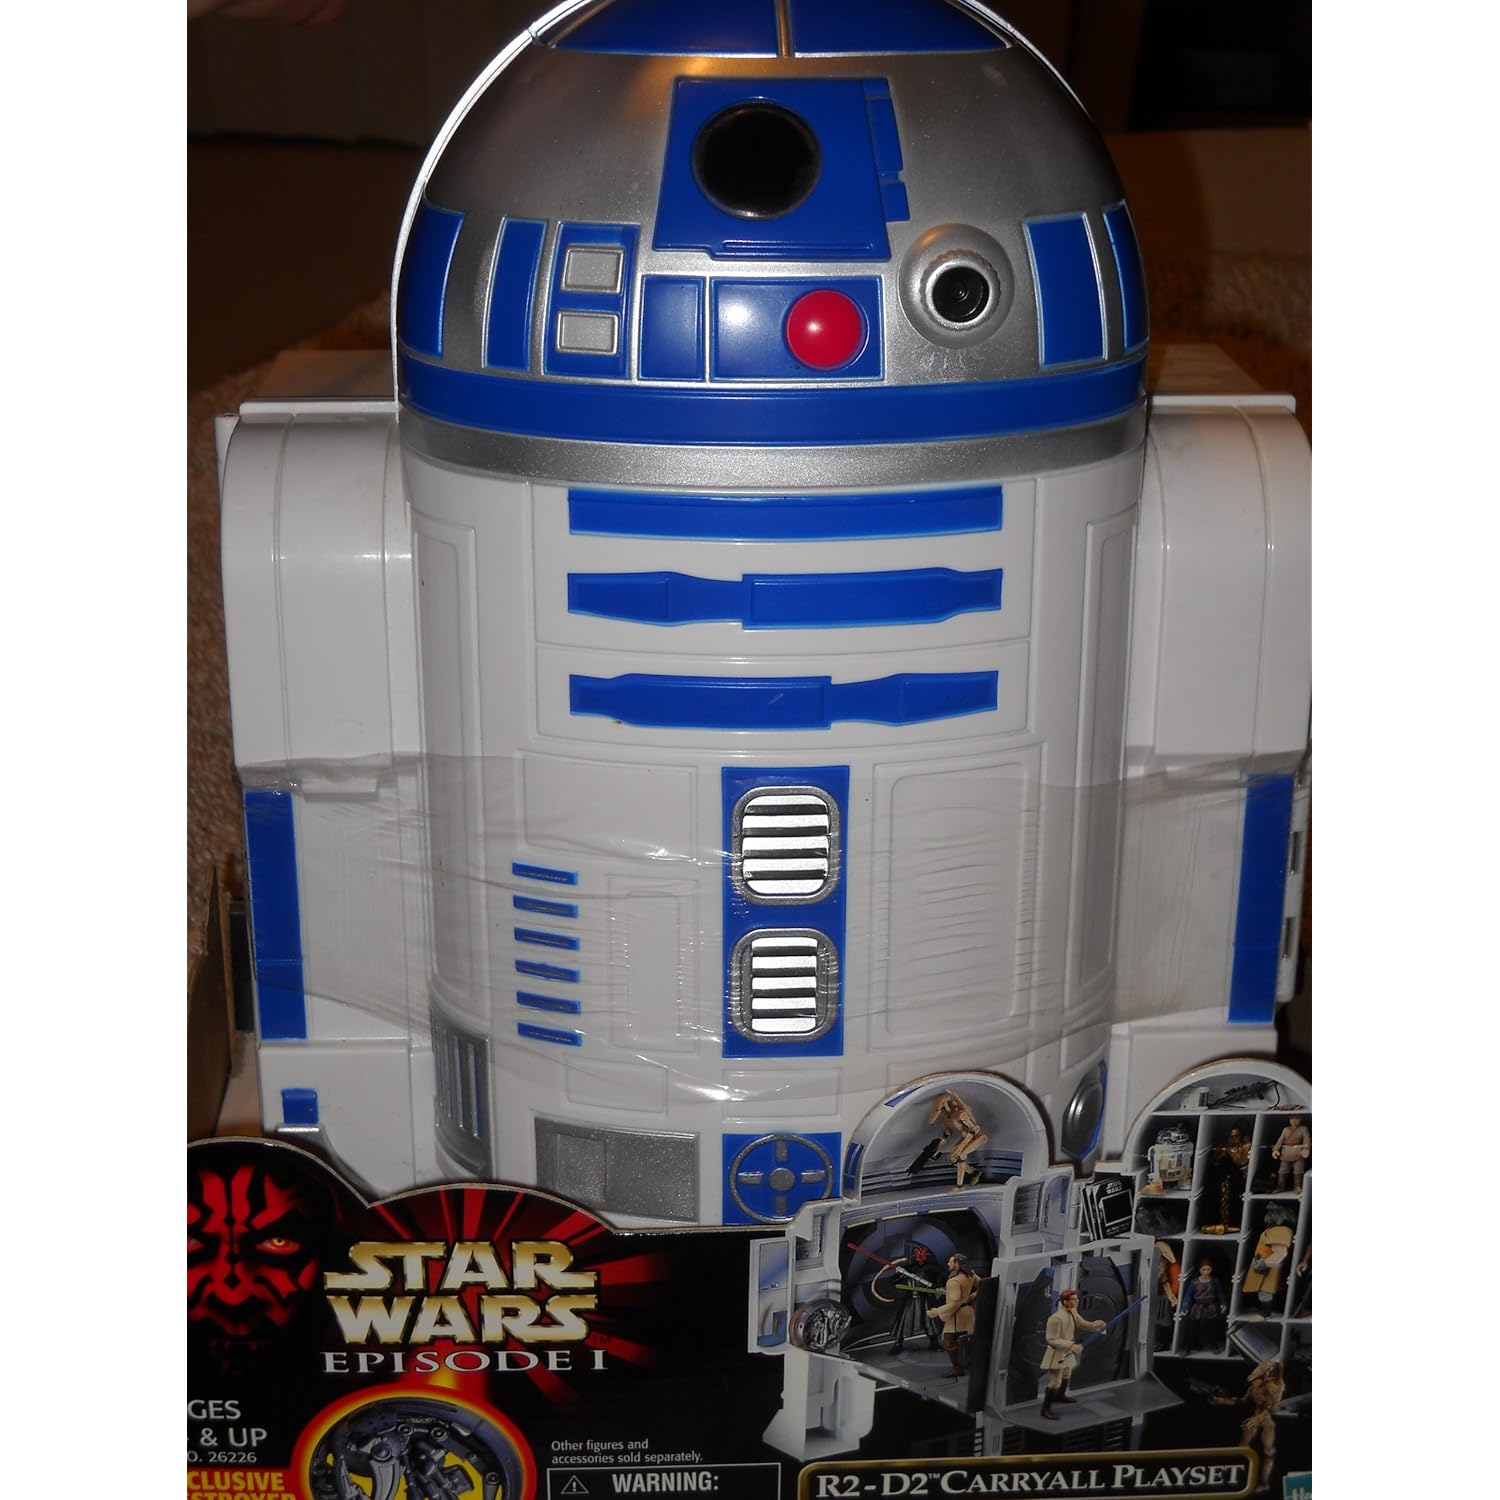 Hasbro Star Wars Episode 1 R2-D2 Carryall Playset with Exclusive Destroyer Droid Figure